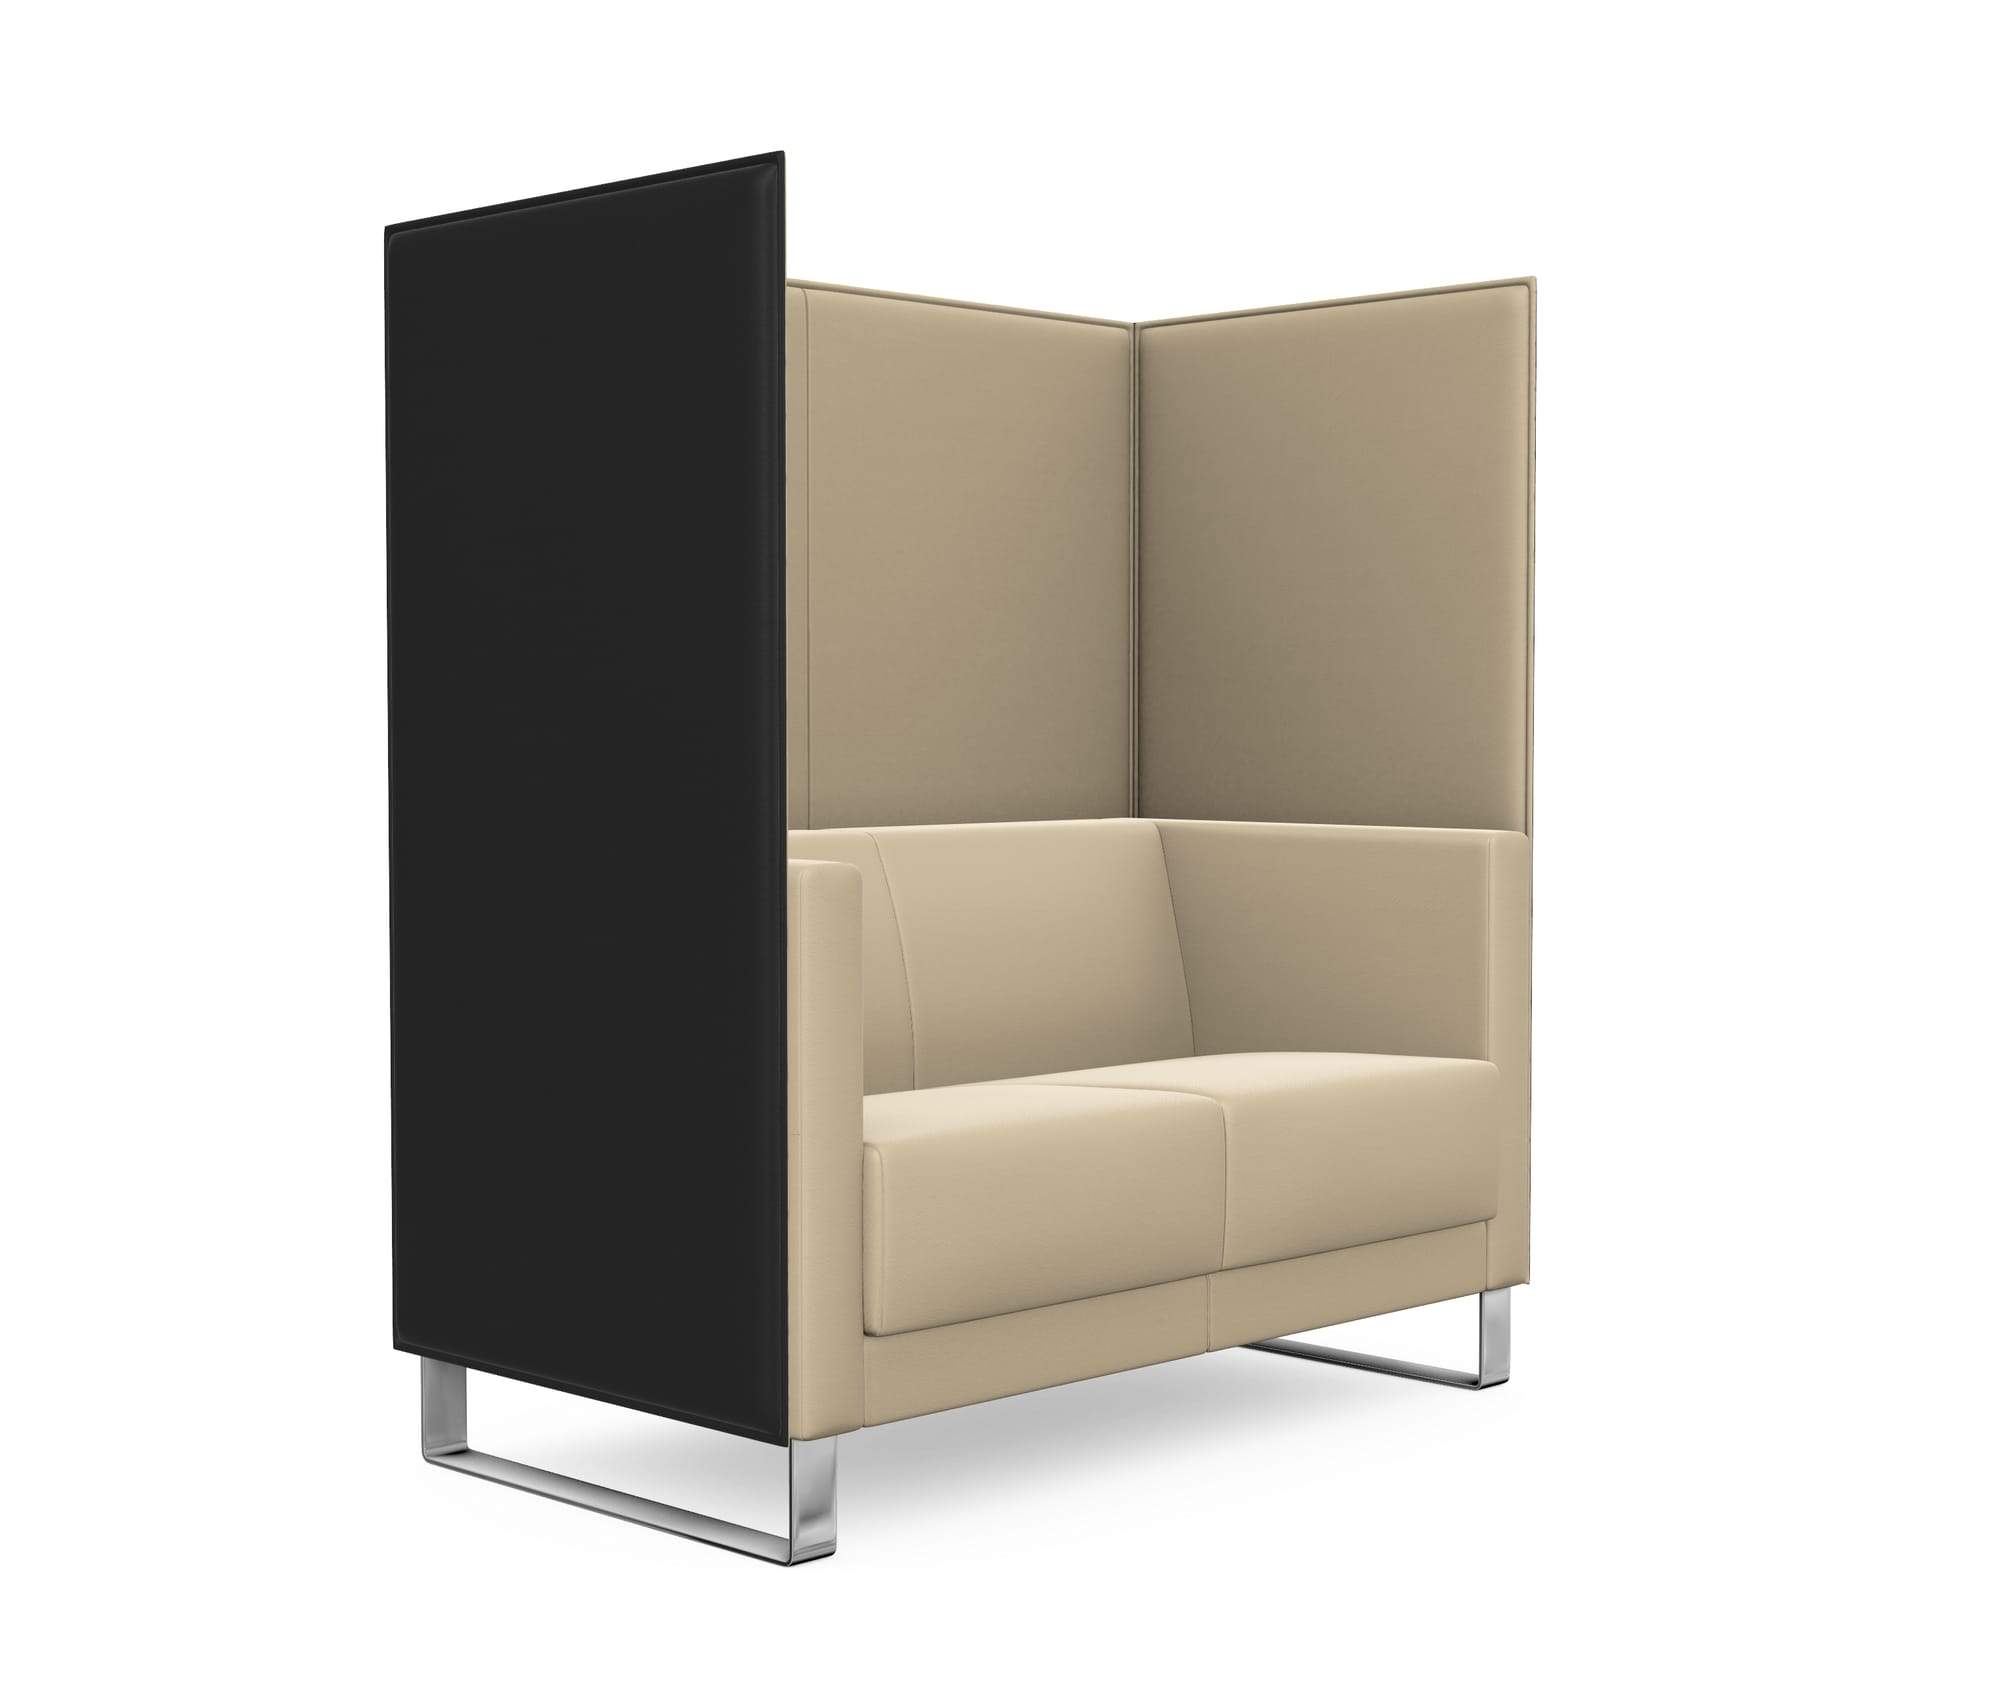 Vancouver Lite 2-Seat Sofa with Partition Walls